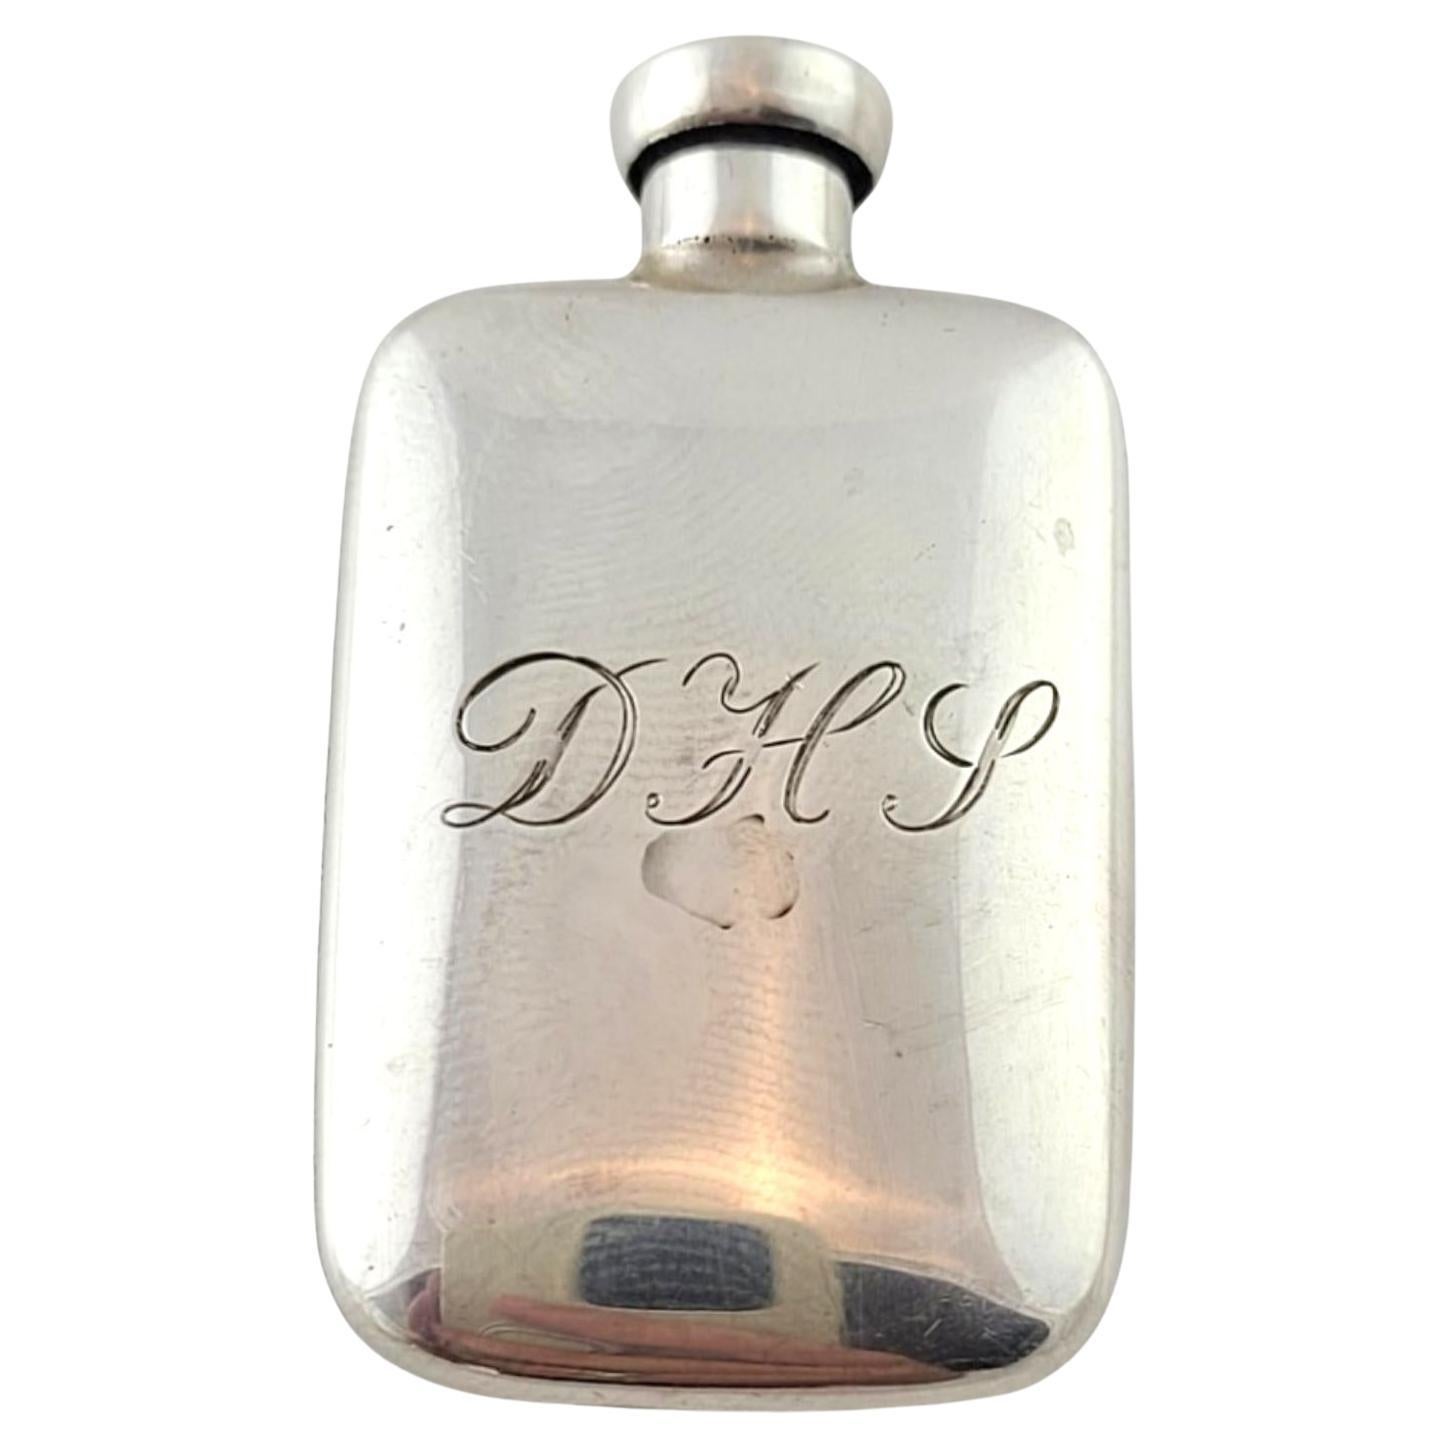 Vintage Tiffany & Co. Sterling Silver Engraved Perfume Flask #17411